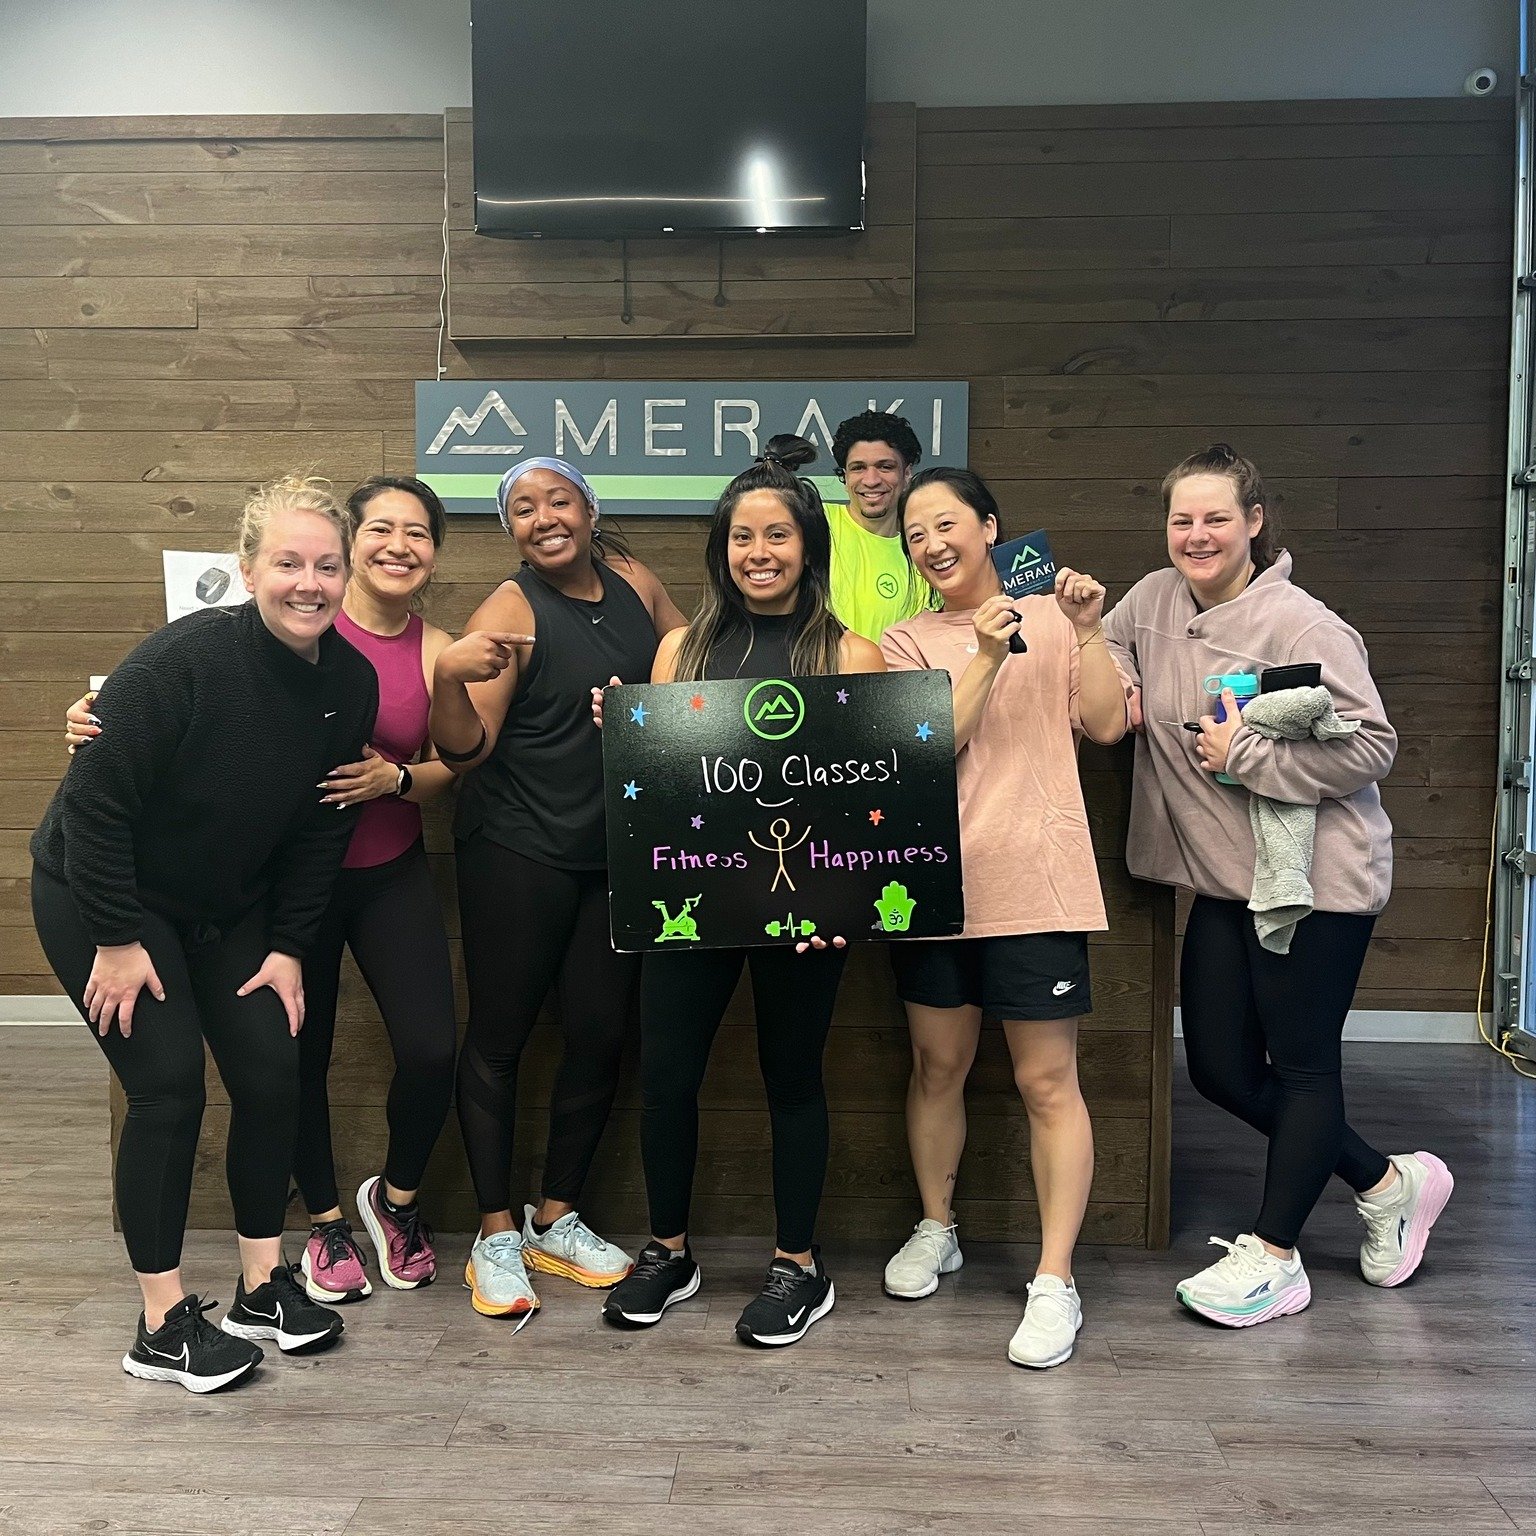 Huge congratulations to Daisy on hitting 100 workouts! Your hard work and consistency have paid off immensely. Keep pushing yourself and achieving those fitness goals! Thank you for being part of Meraki!